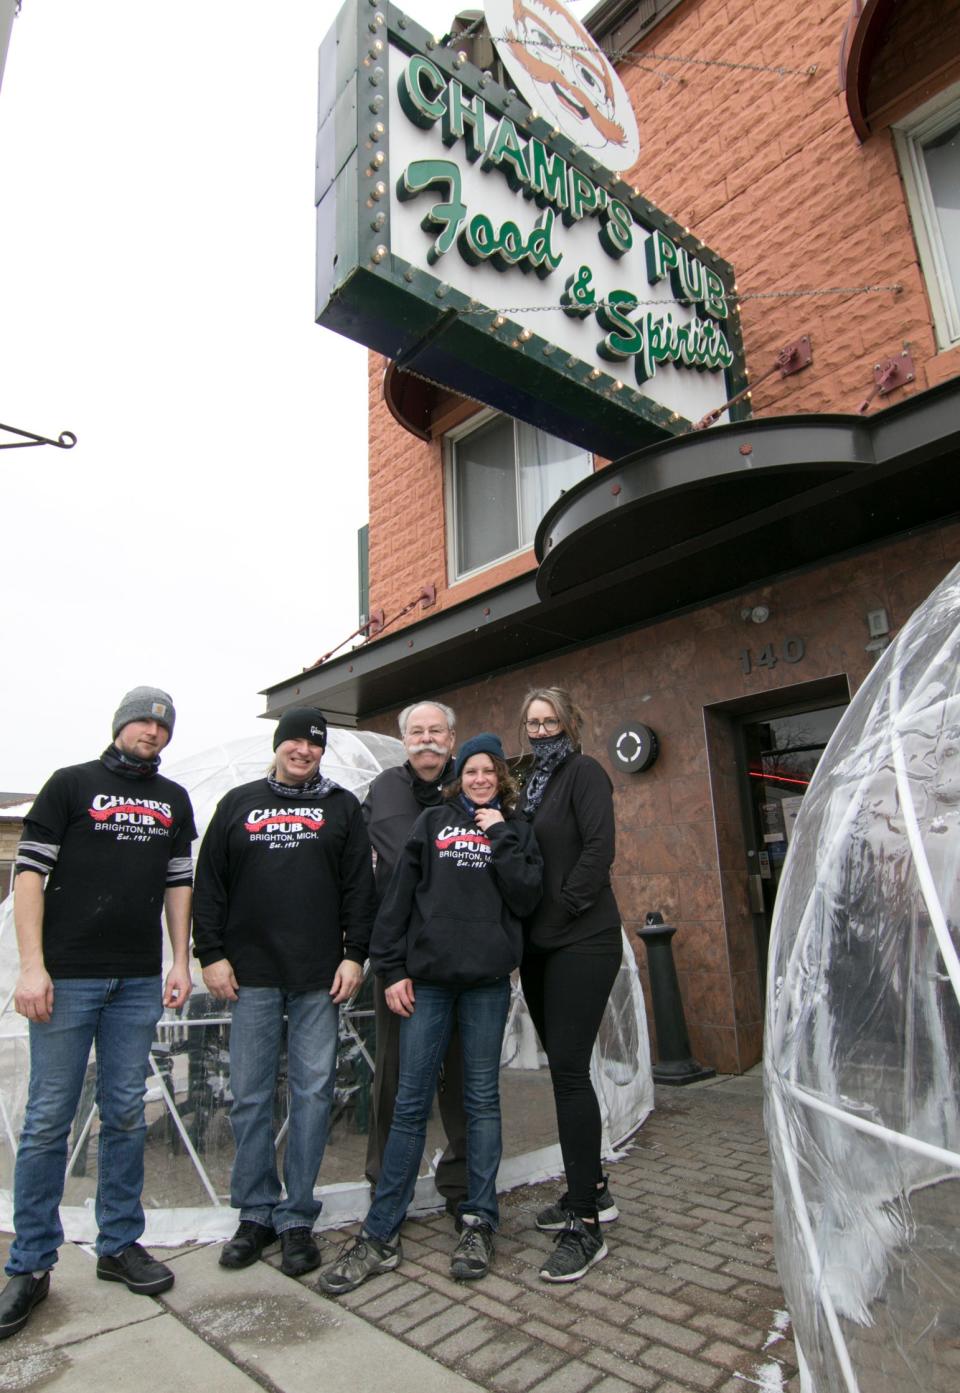 Staff at Champ’s Pub in Brighton, from left, former cook Sean Wilson and current cook Scott Claxtonsteine, owner Dave “Champ” Beauchamp, server Chelsea Hamilton and bartender Kerri Sauve, are shown Friday, Jan. 22, 2021, when they were preparing to reopen indoor dining.